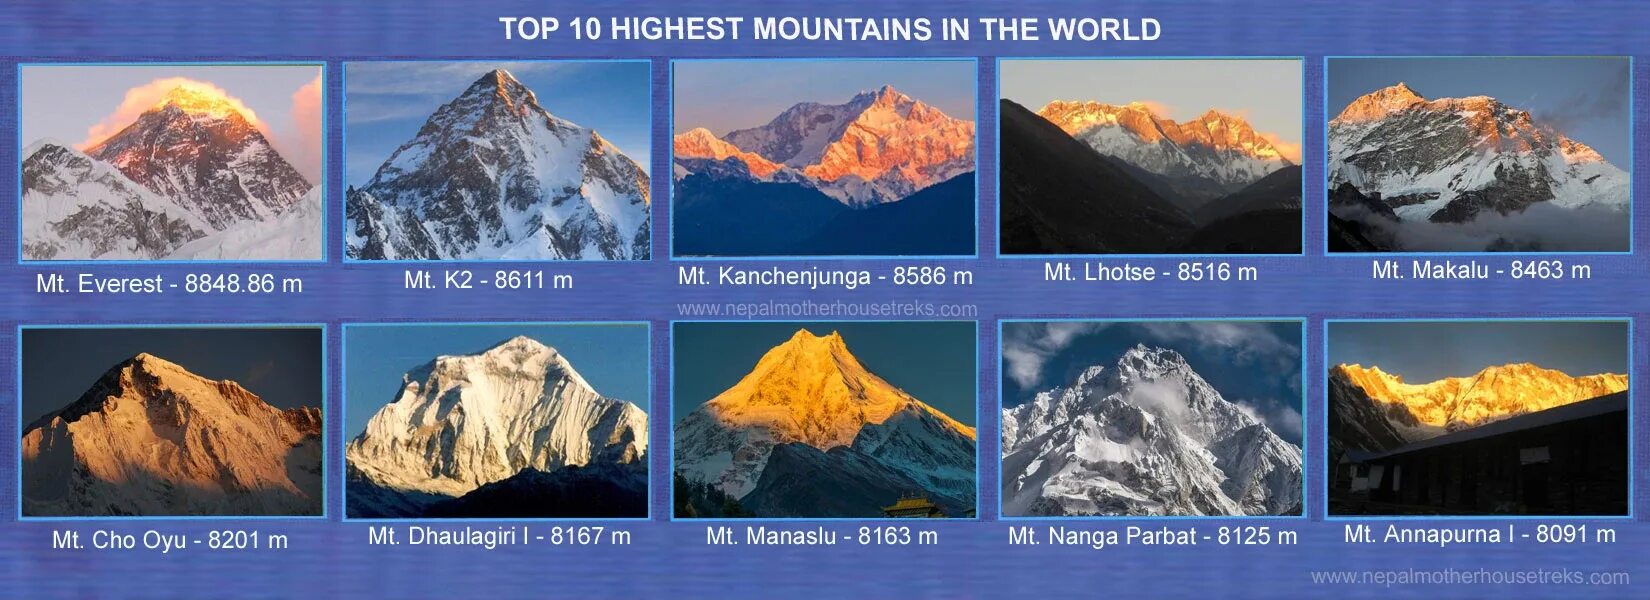 Mount everest is high in the world. The Highest Mountain in the World. The Tallest Mountain in the World. Mount Everest is High Mountain in the World. Top 10 Highest Mountains.